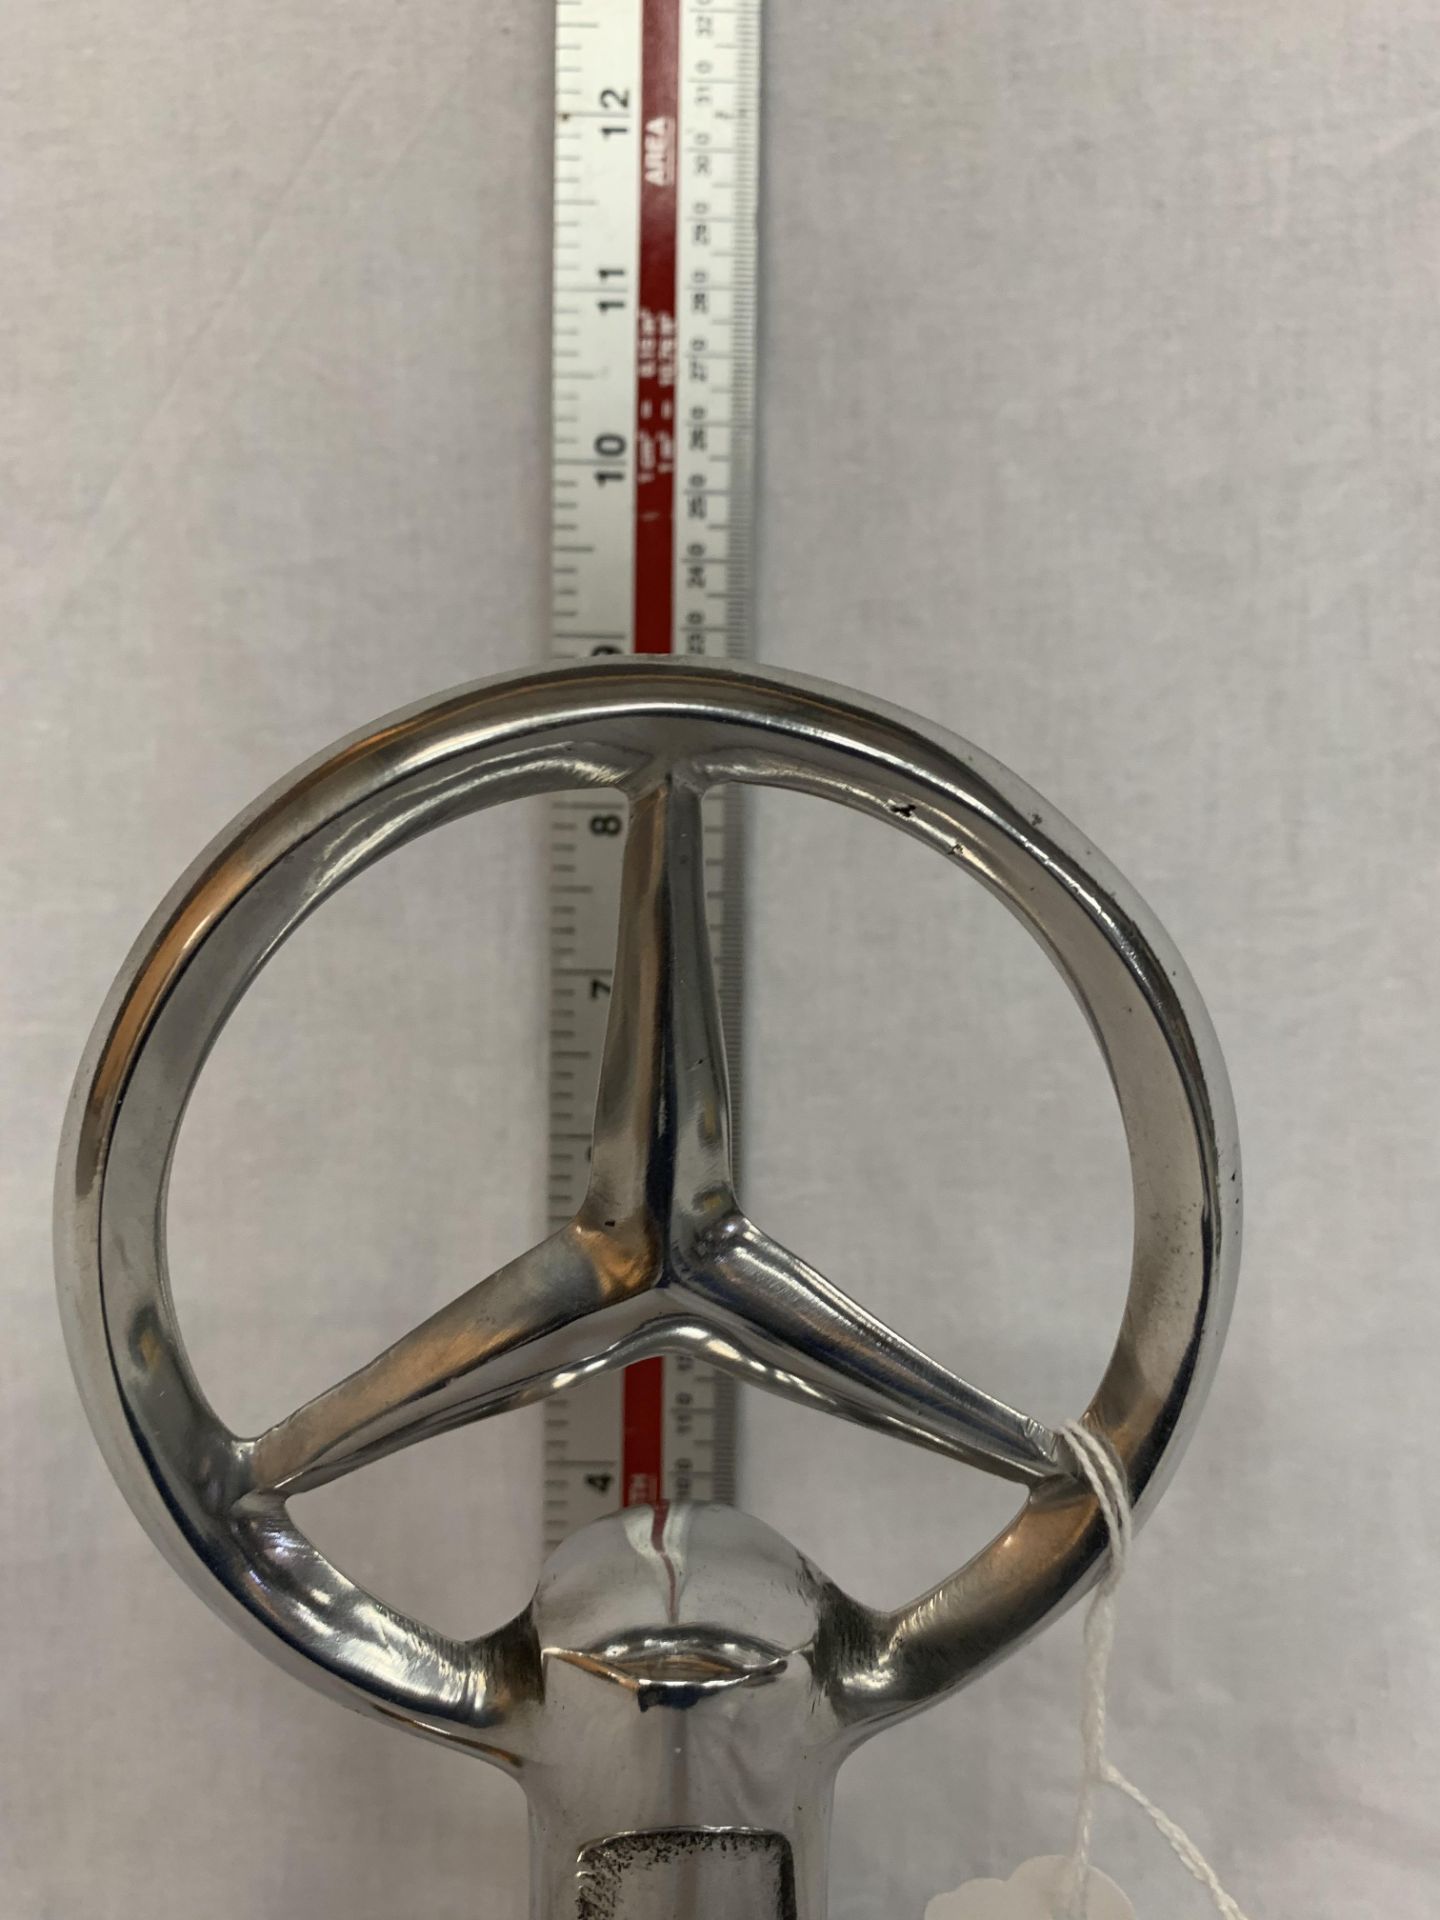 A MERCEDES BENZ CHROME CAR MASCOT ORNAMENT 9 INCHES TALL - Image 2 of 3